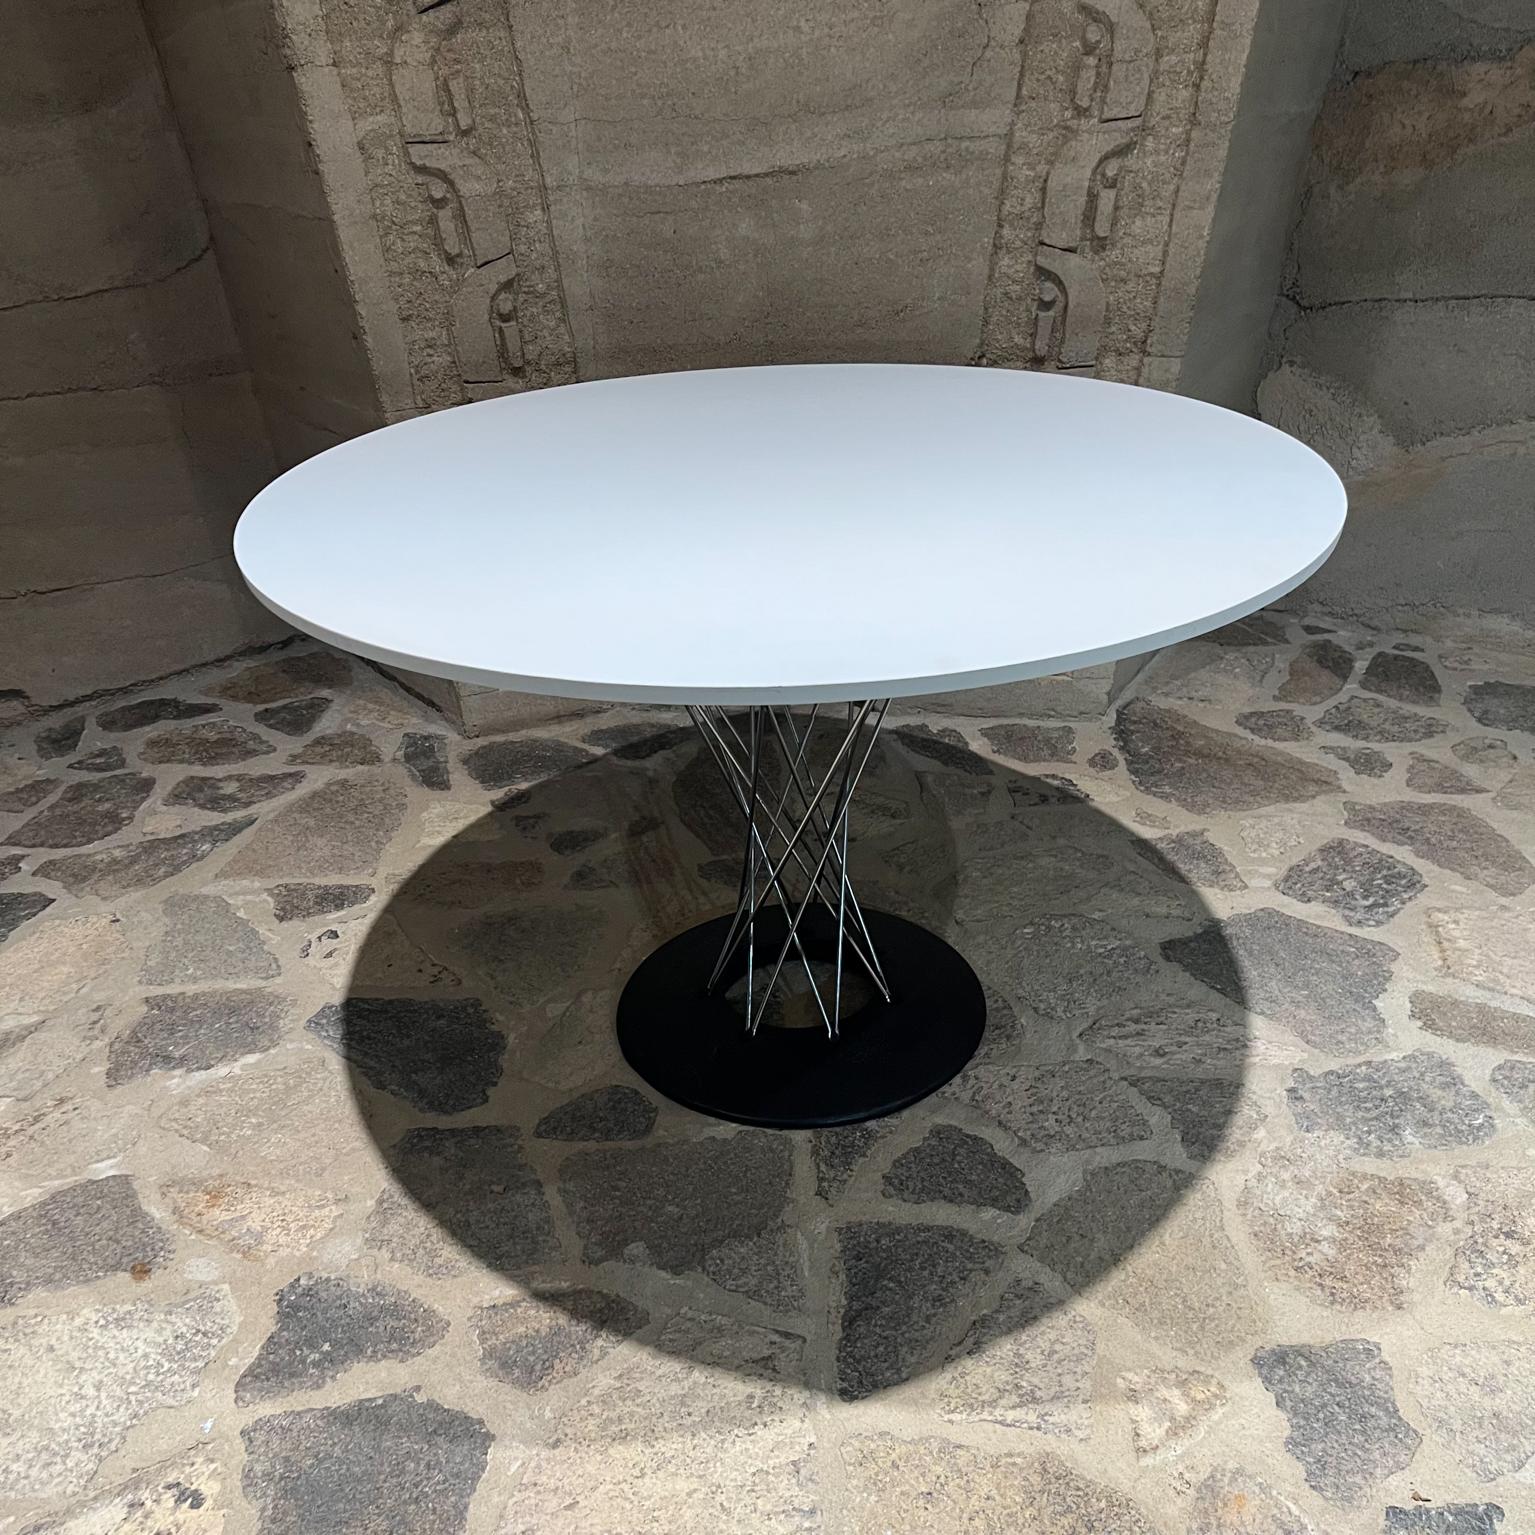 Mid-Century Modern 1957 Original Mod Cyclone Dining Table Isamu Noguchi for Knoll + New Top For Sale